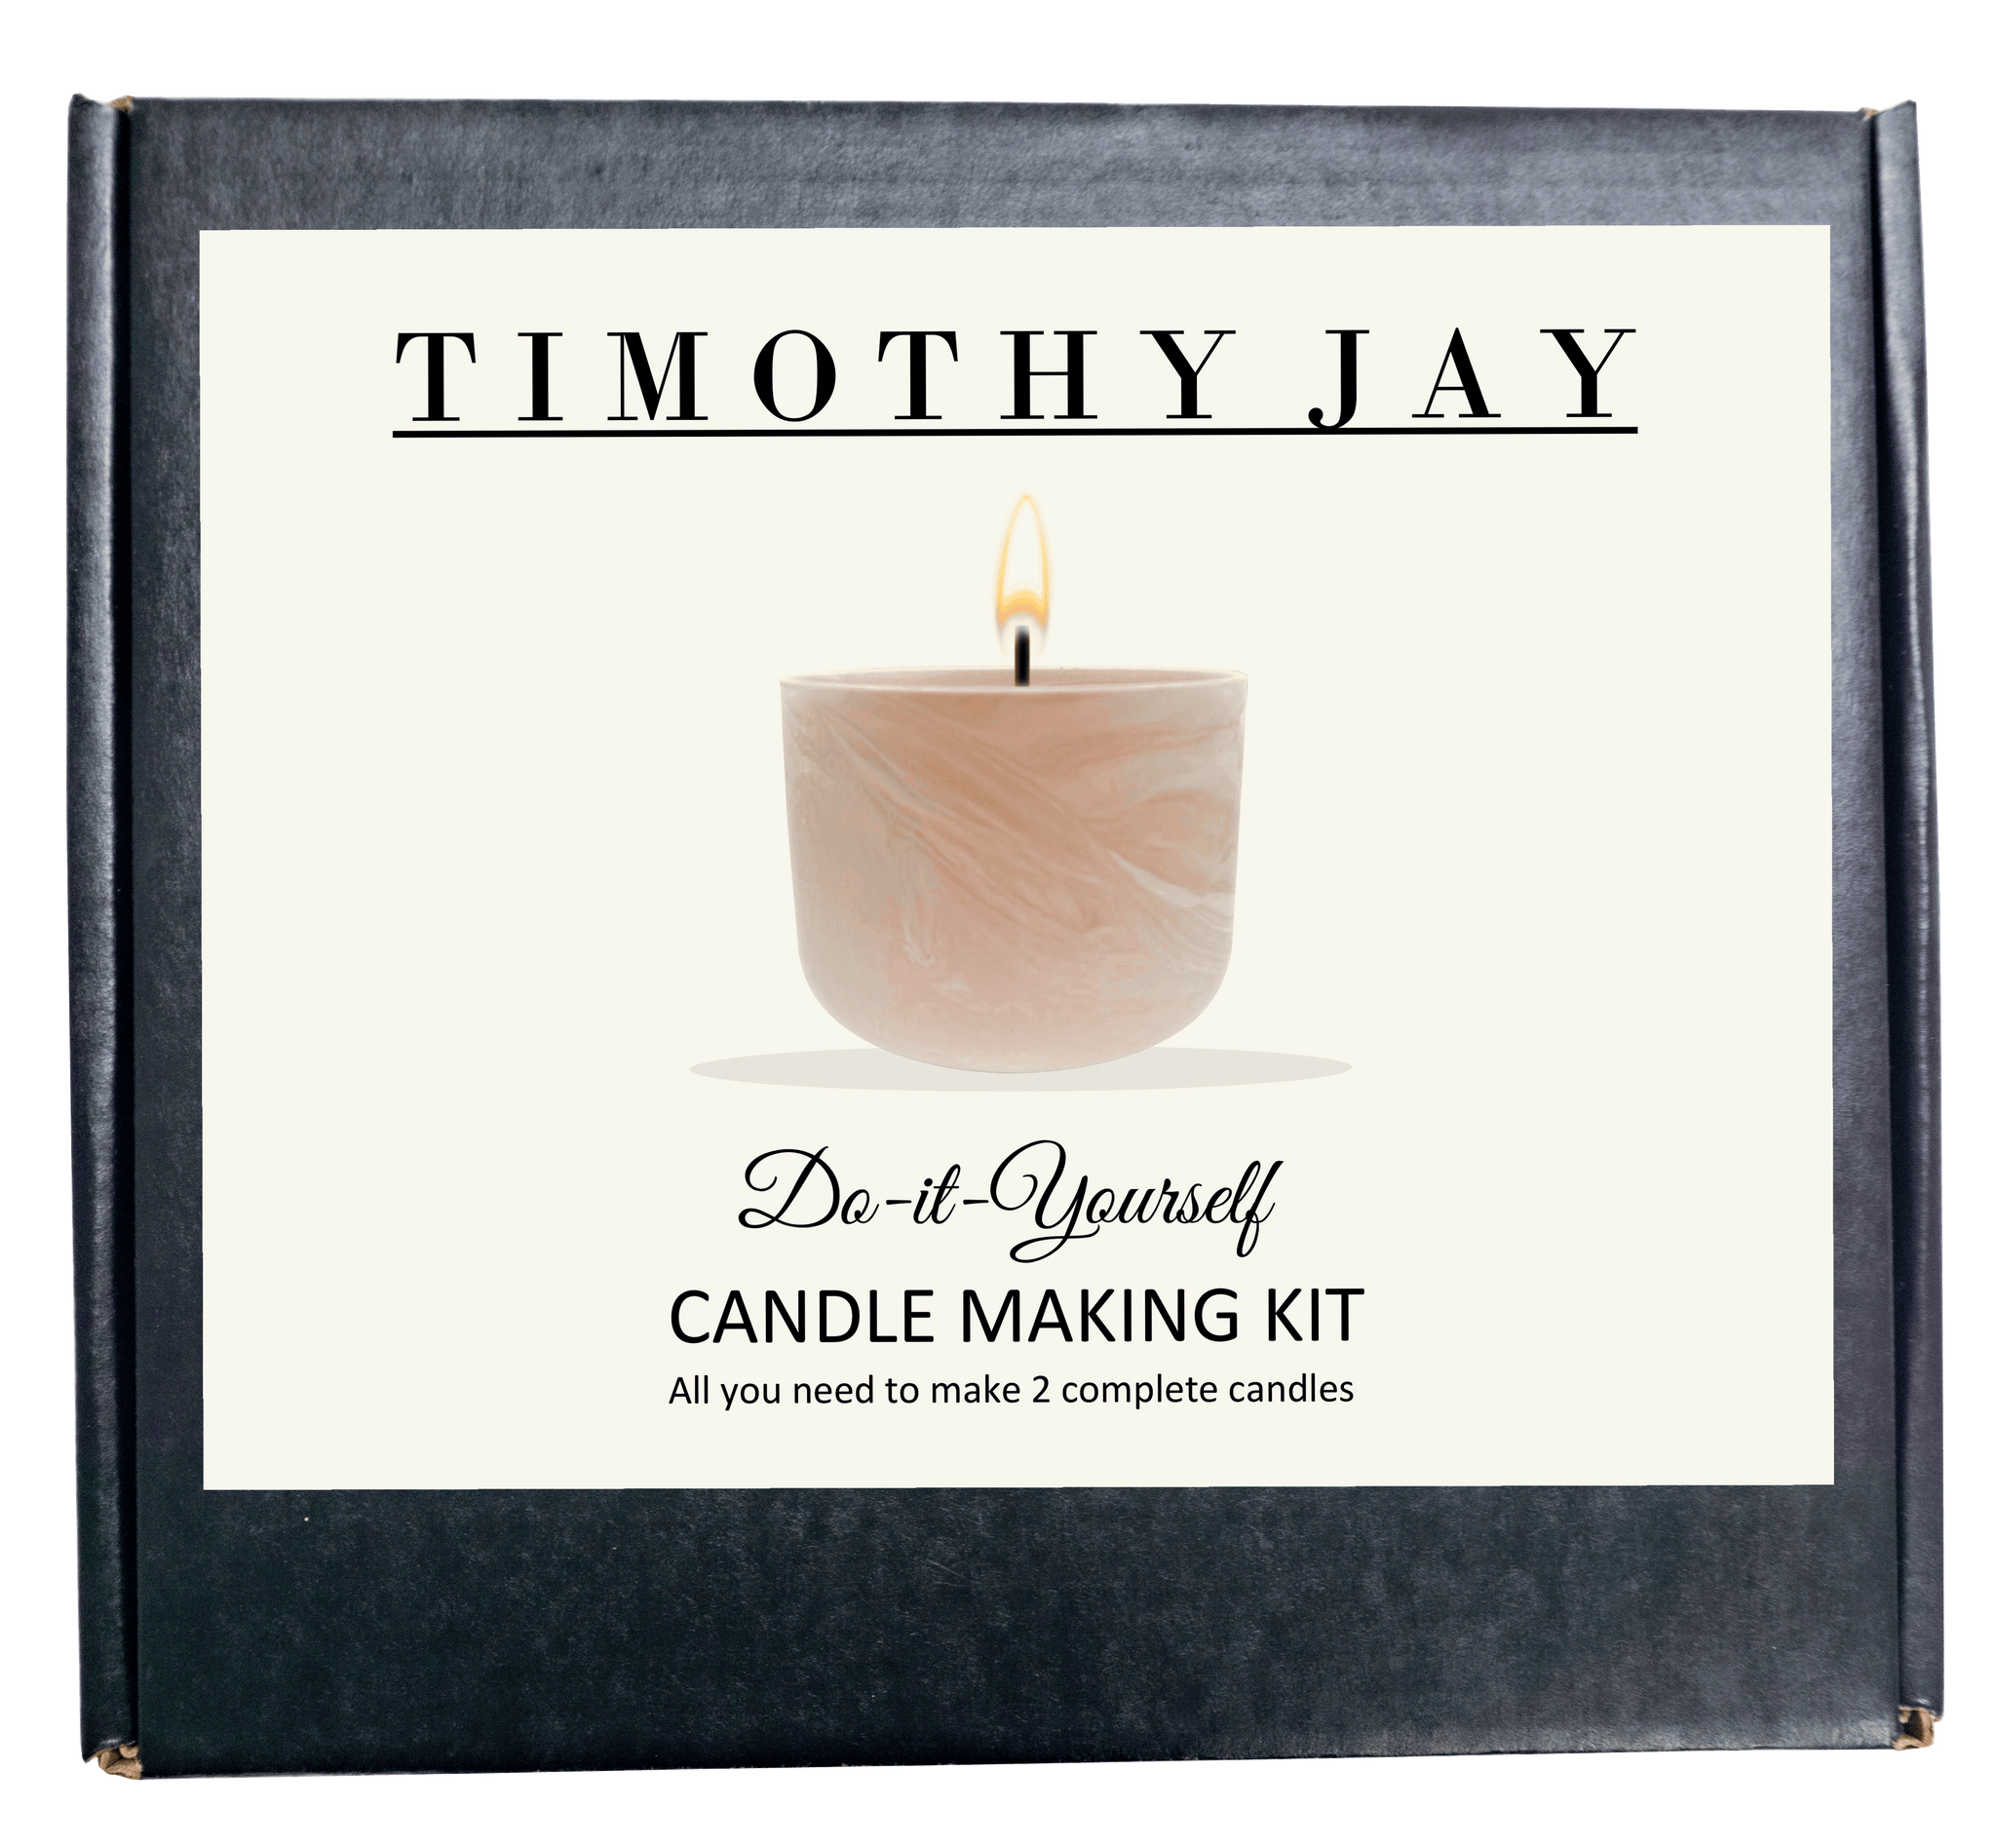 Make your own candle – The House of Timothy Jay